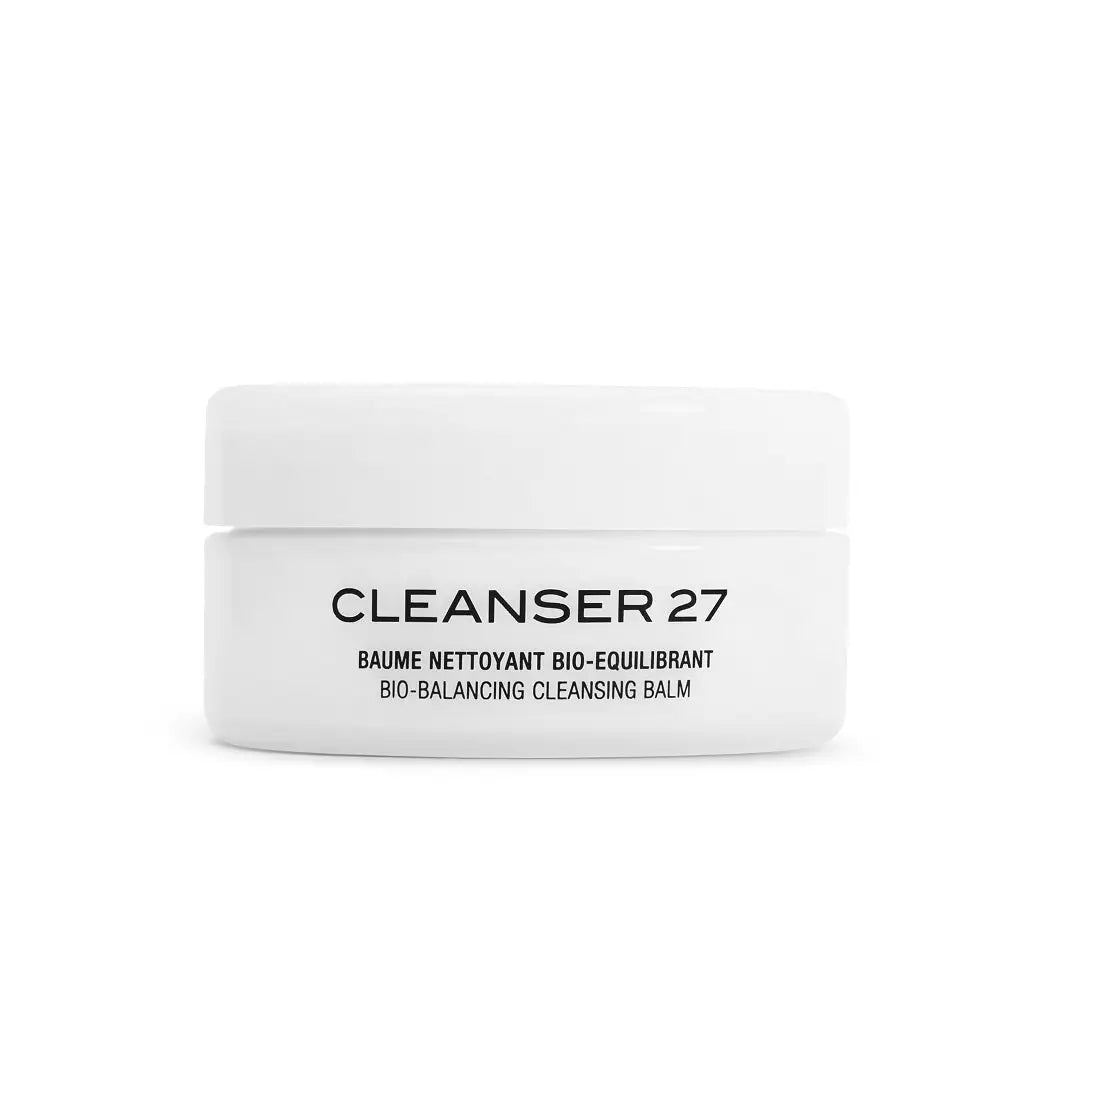 Cosmetics 27 Cleanser 50ml - Free Shipping Worldwide